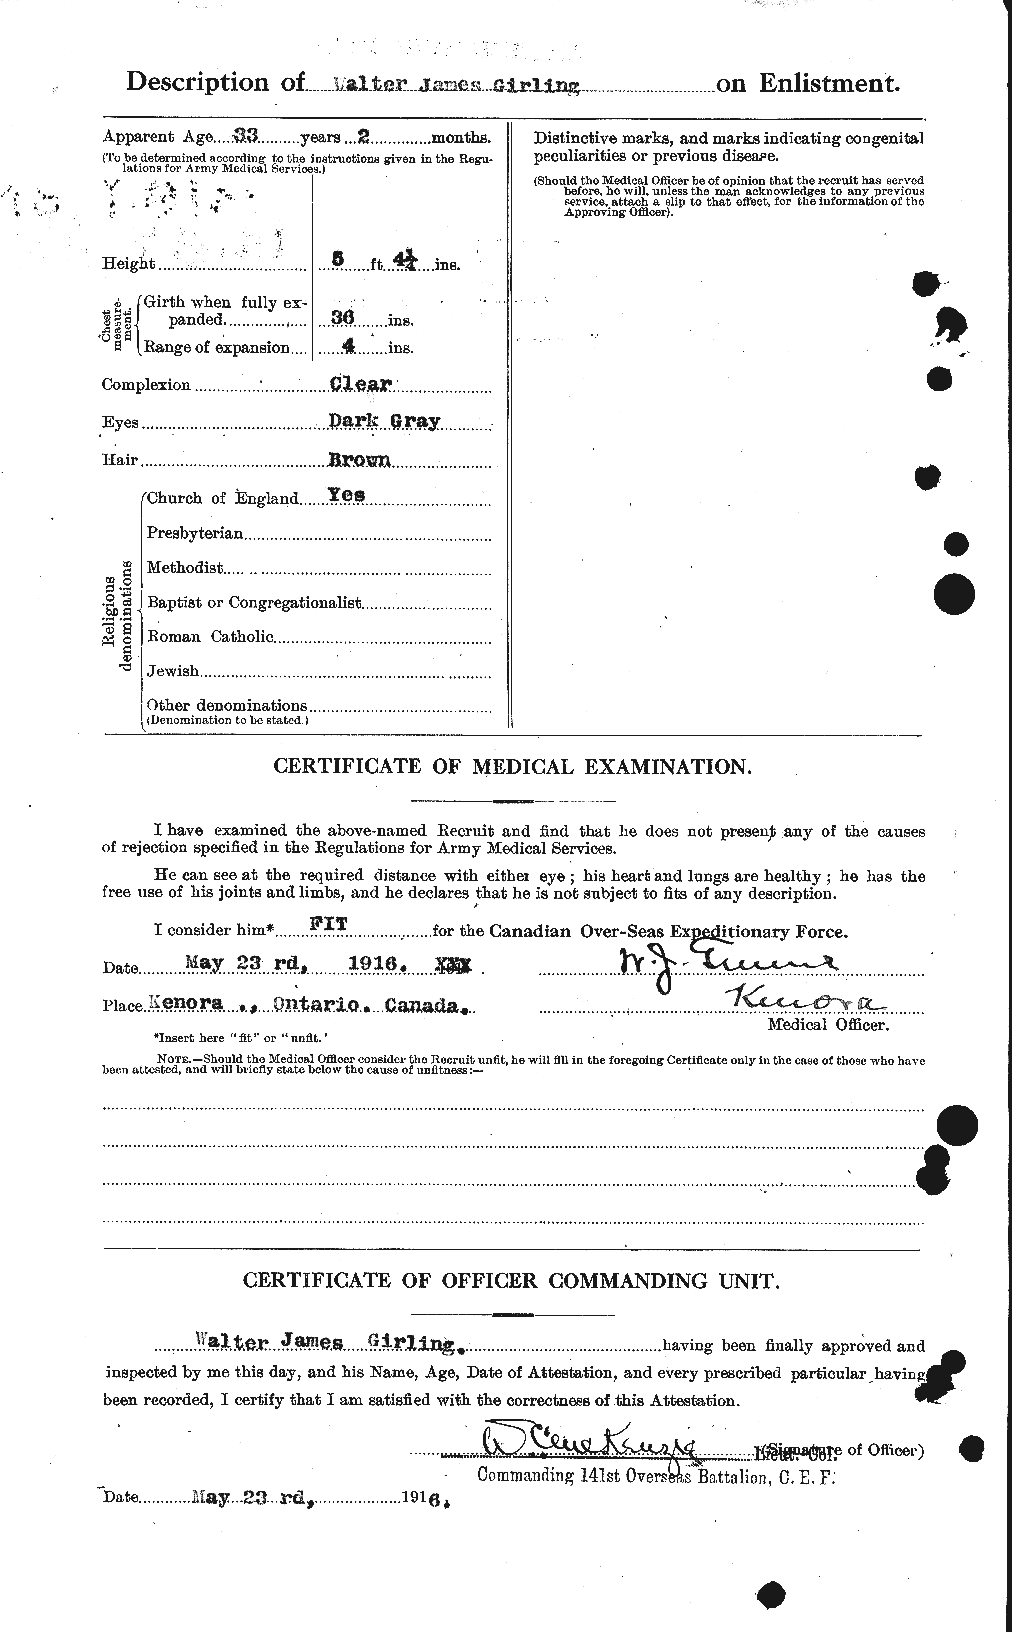 Personnel Records of the First World War - CEF 349597b